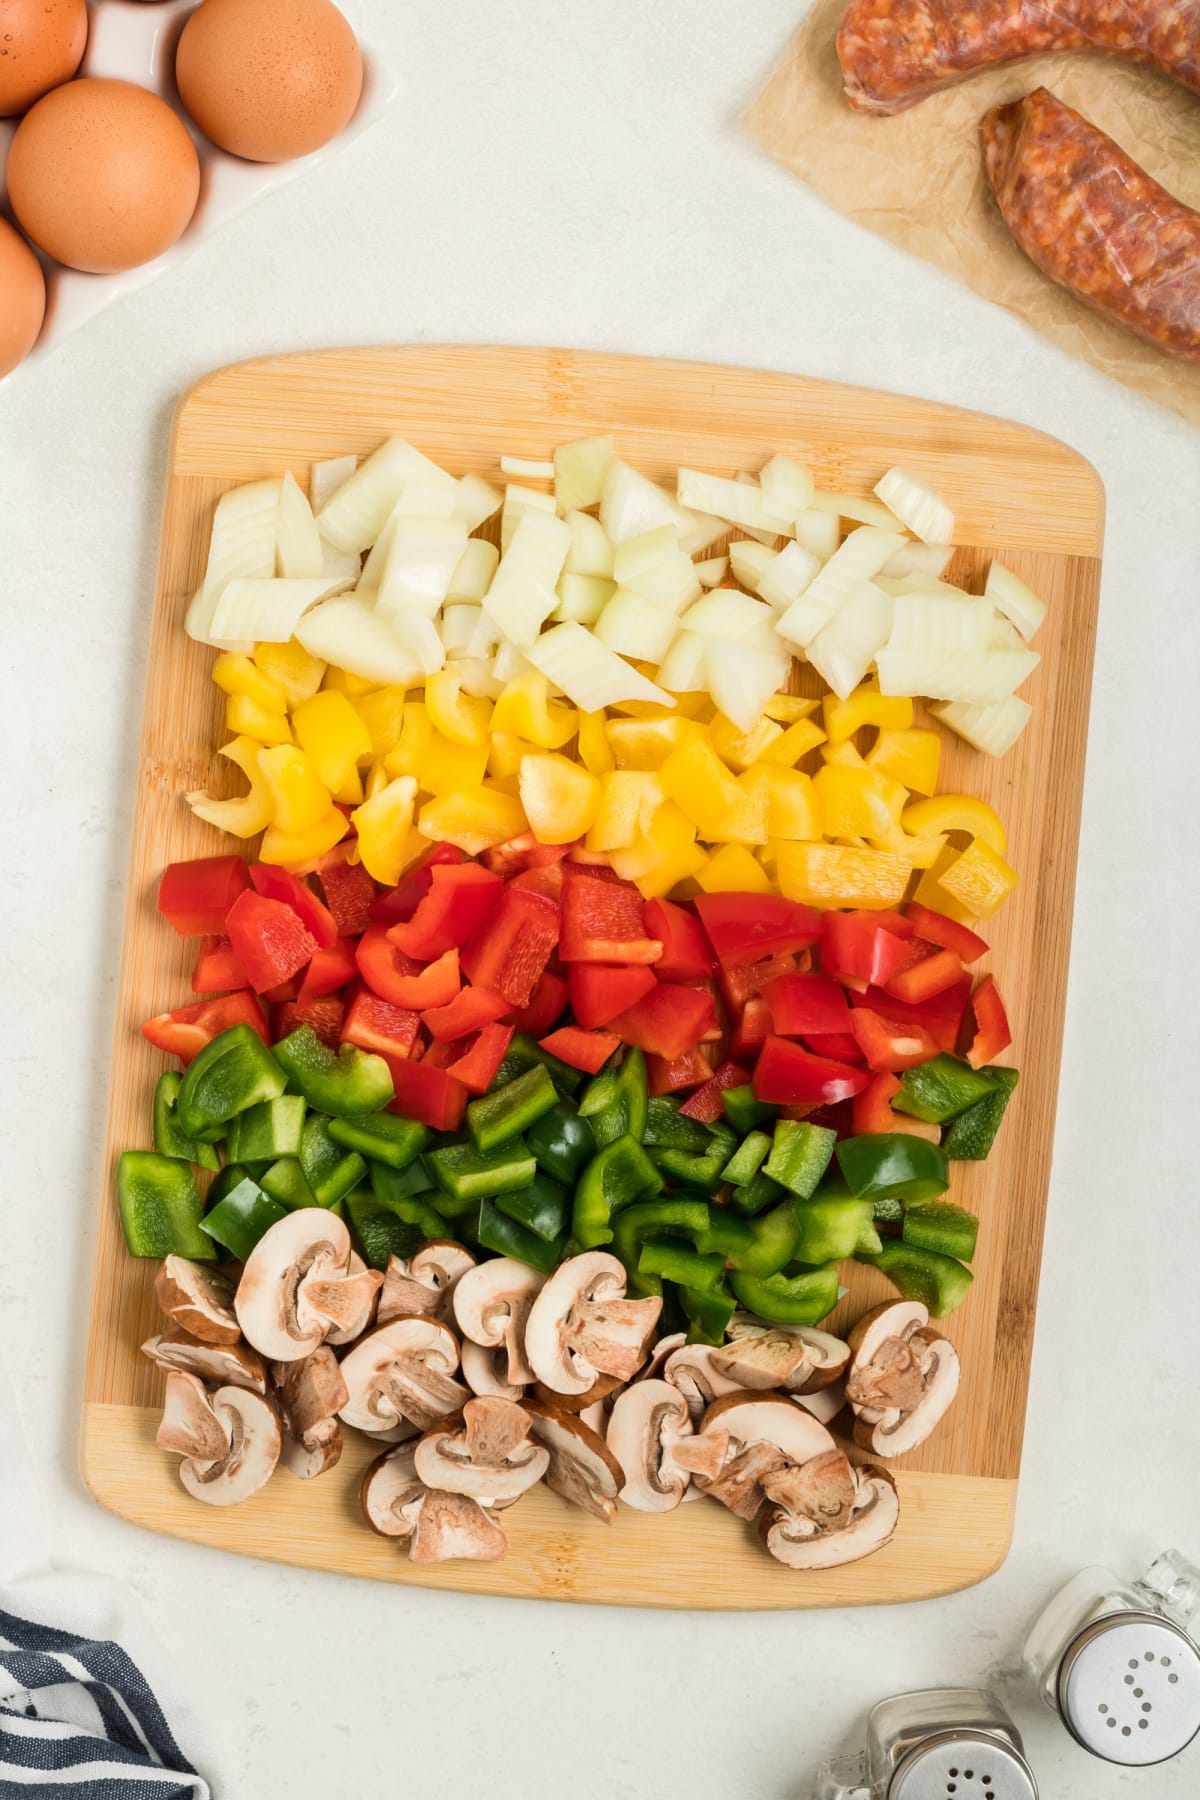 Diced vegetables on cutting board